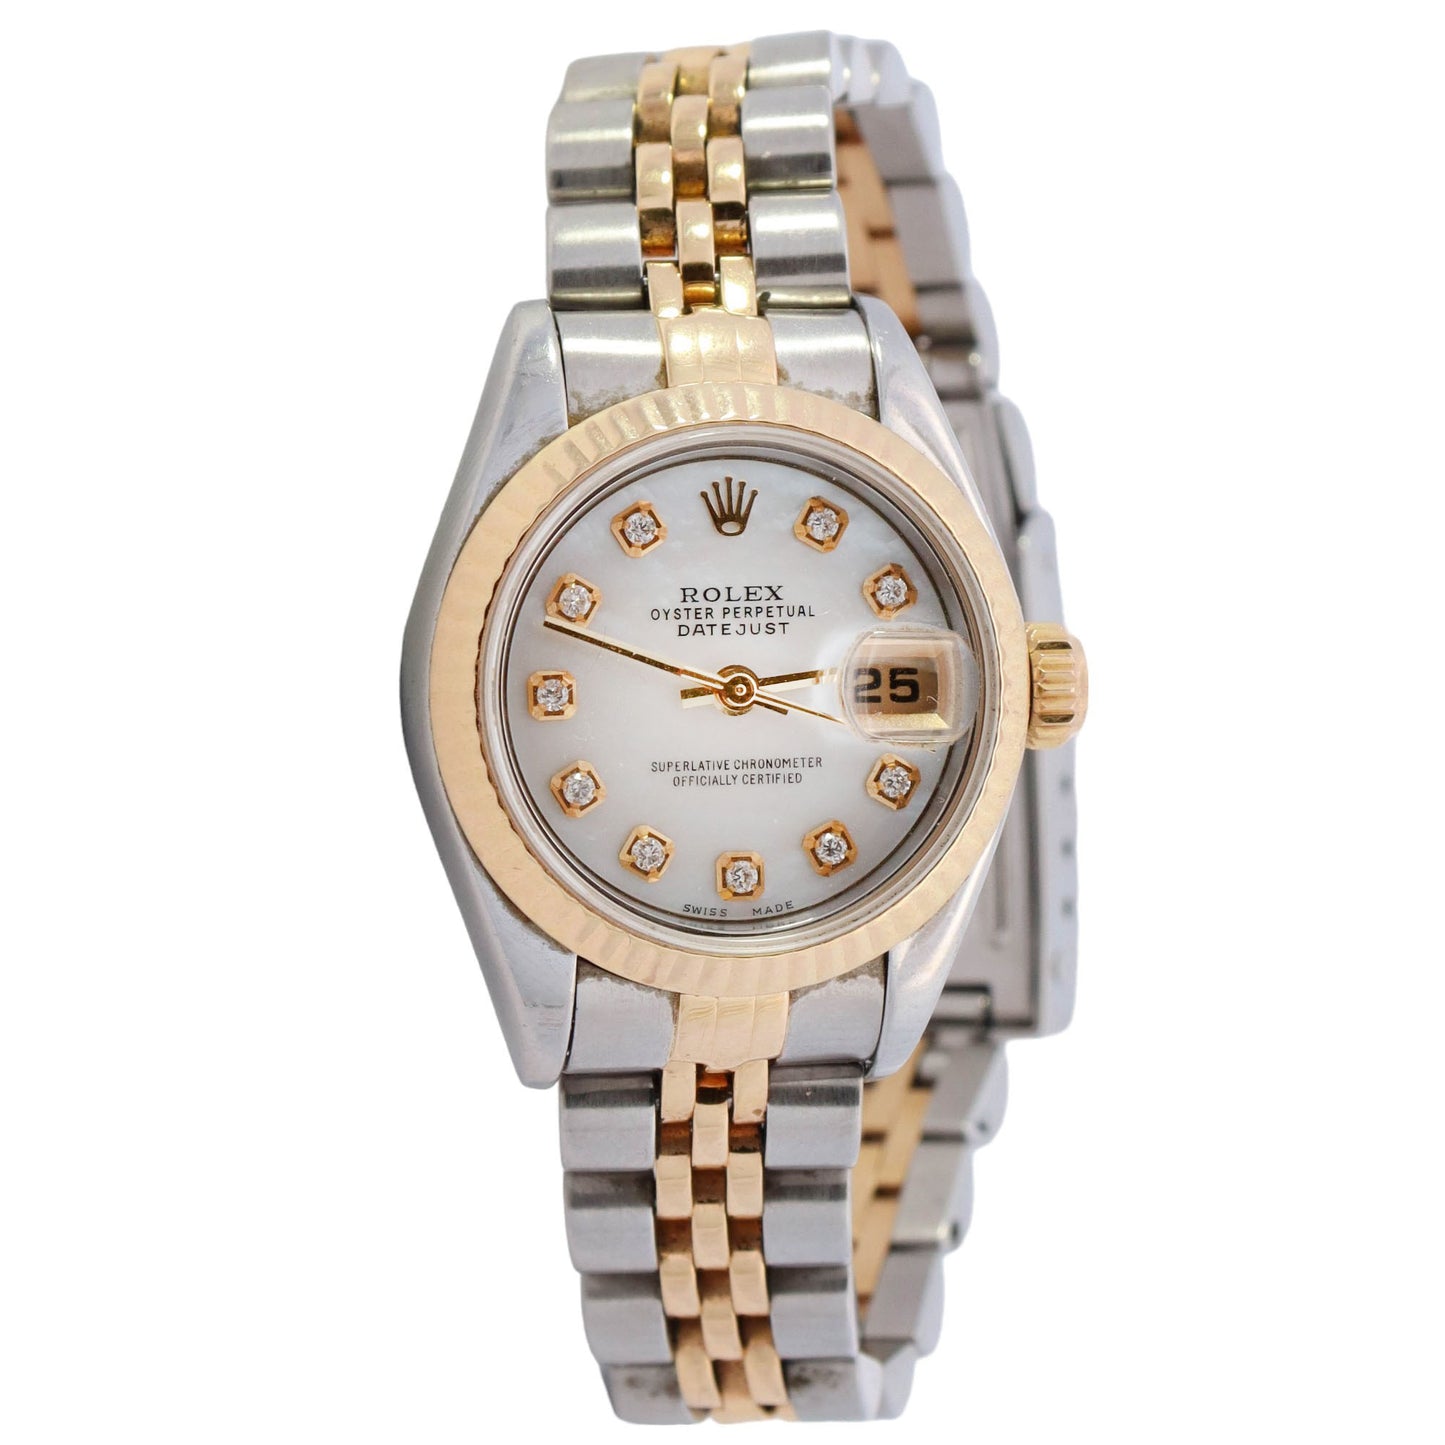 Rolex Datejust Yellow Gold & Stainless Steel 26mm MOP diamond Dial Watch Reference #: 79173 - Happy Jewelers Fine Jewelry Lifetime Warranty